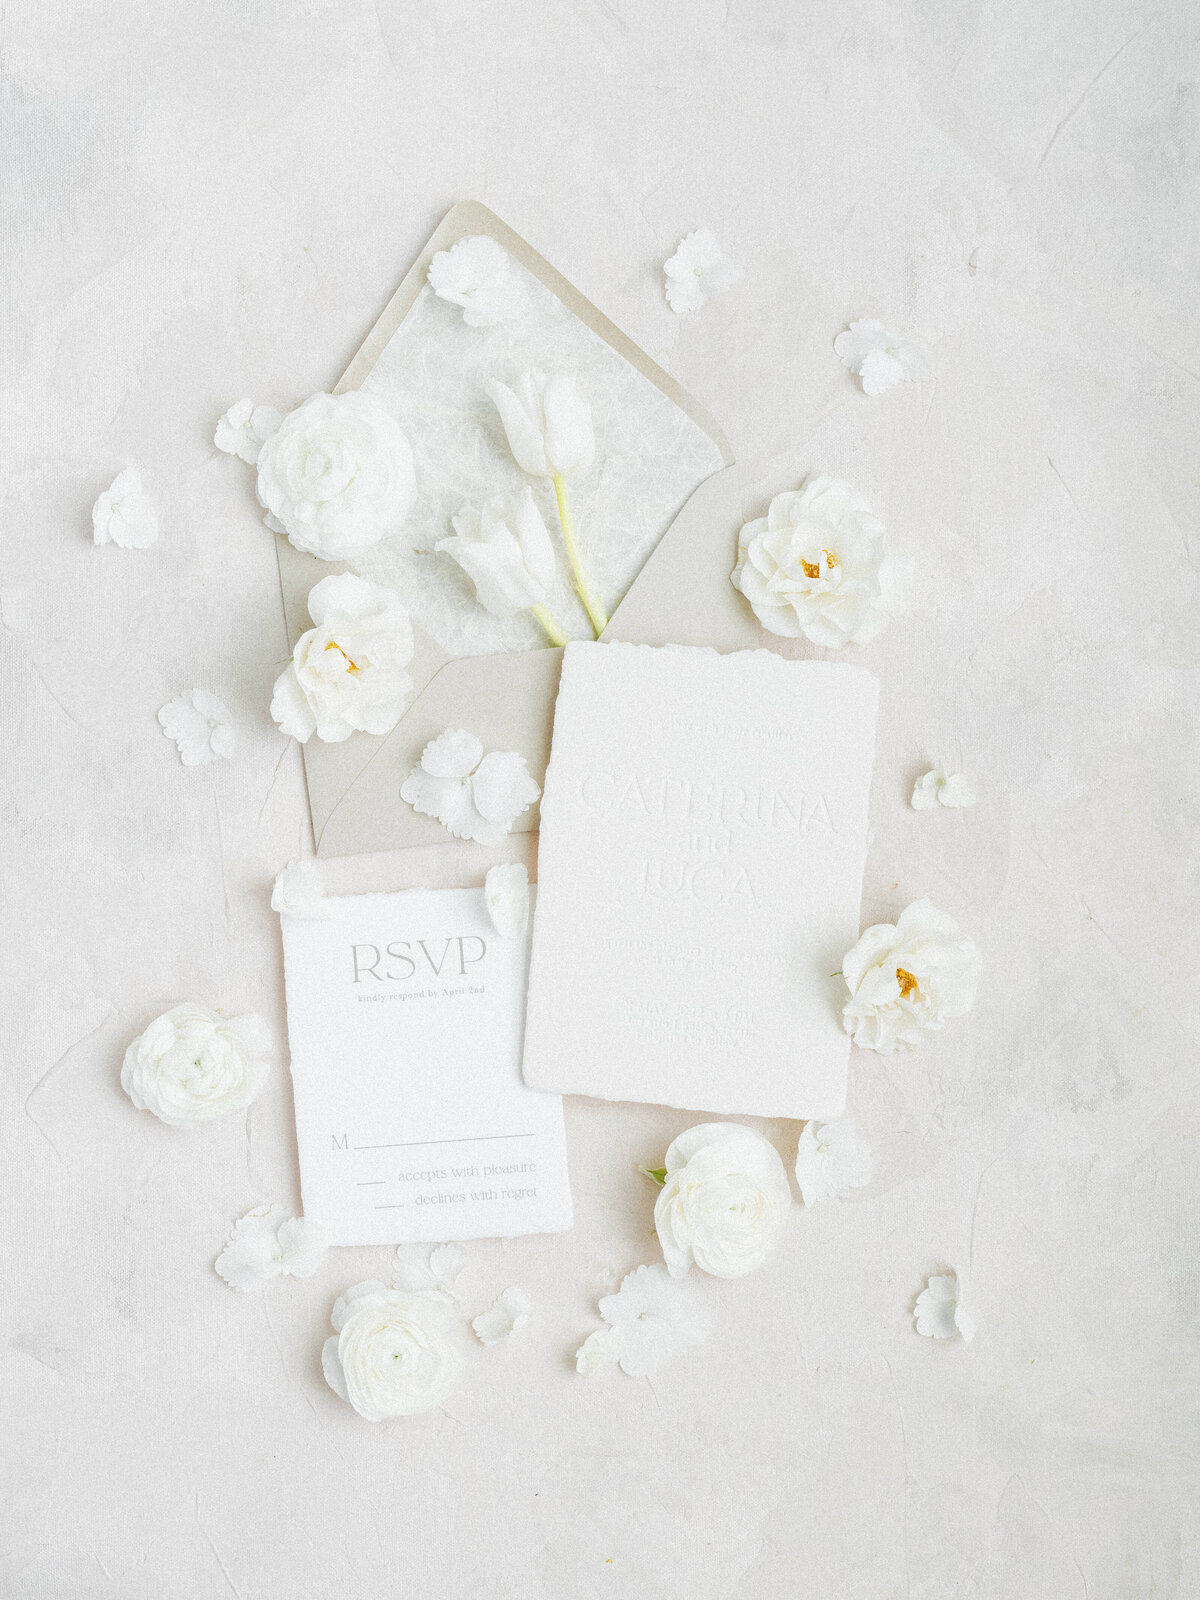 LBV Design House Wedding Design Planning Day-Of Signage Paper Goods Shoppable Accessories Wedding Day Austin, Texas beyond Valerie Strenk Lettered by Valerie Hand Lettering8